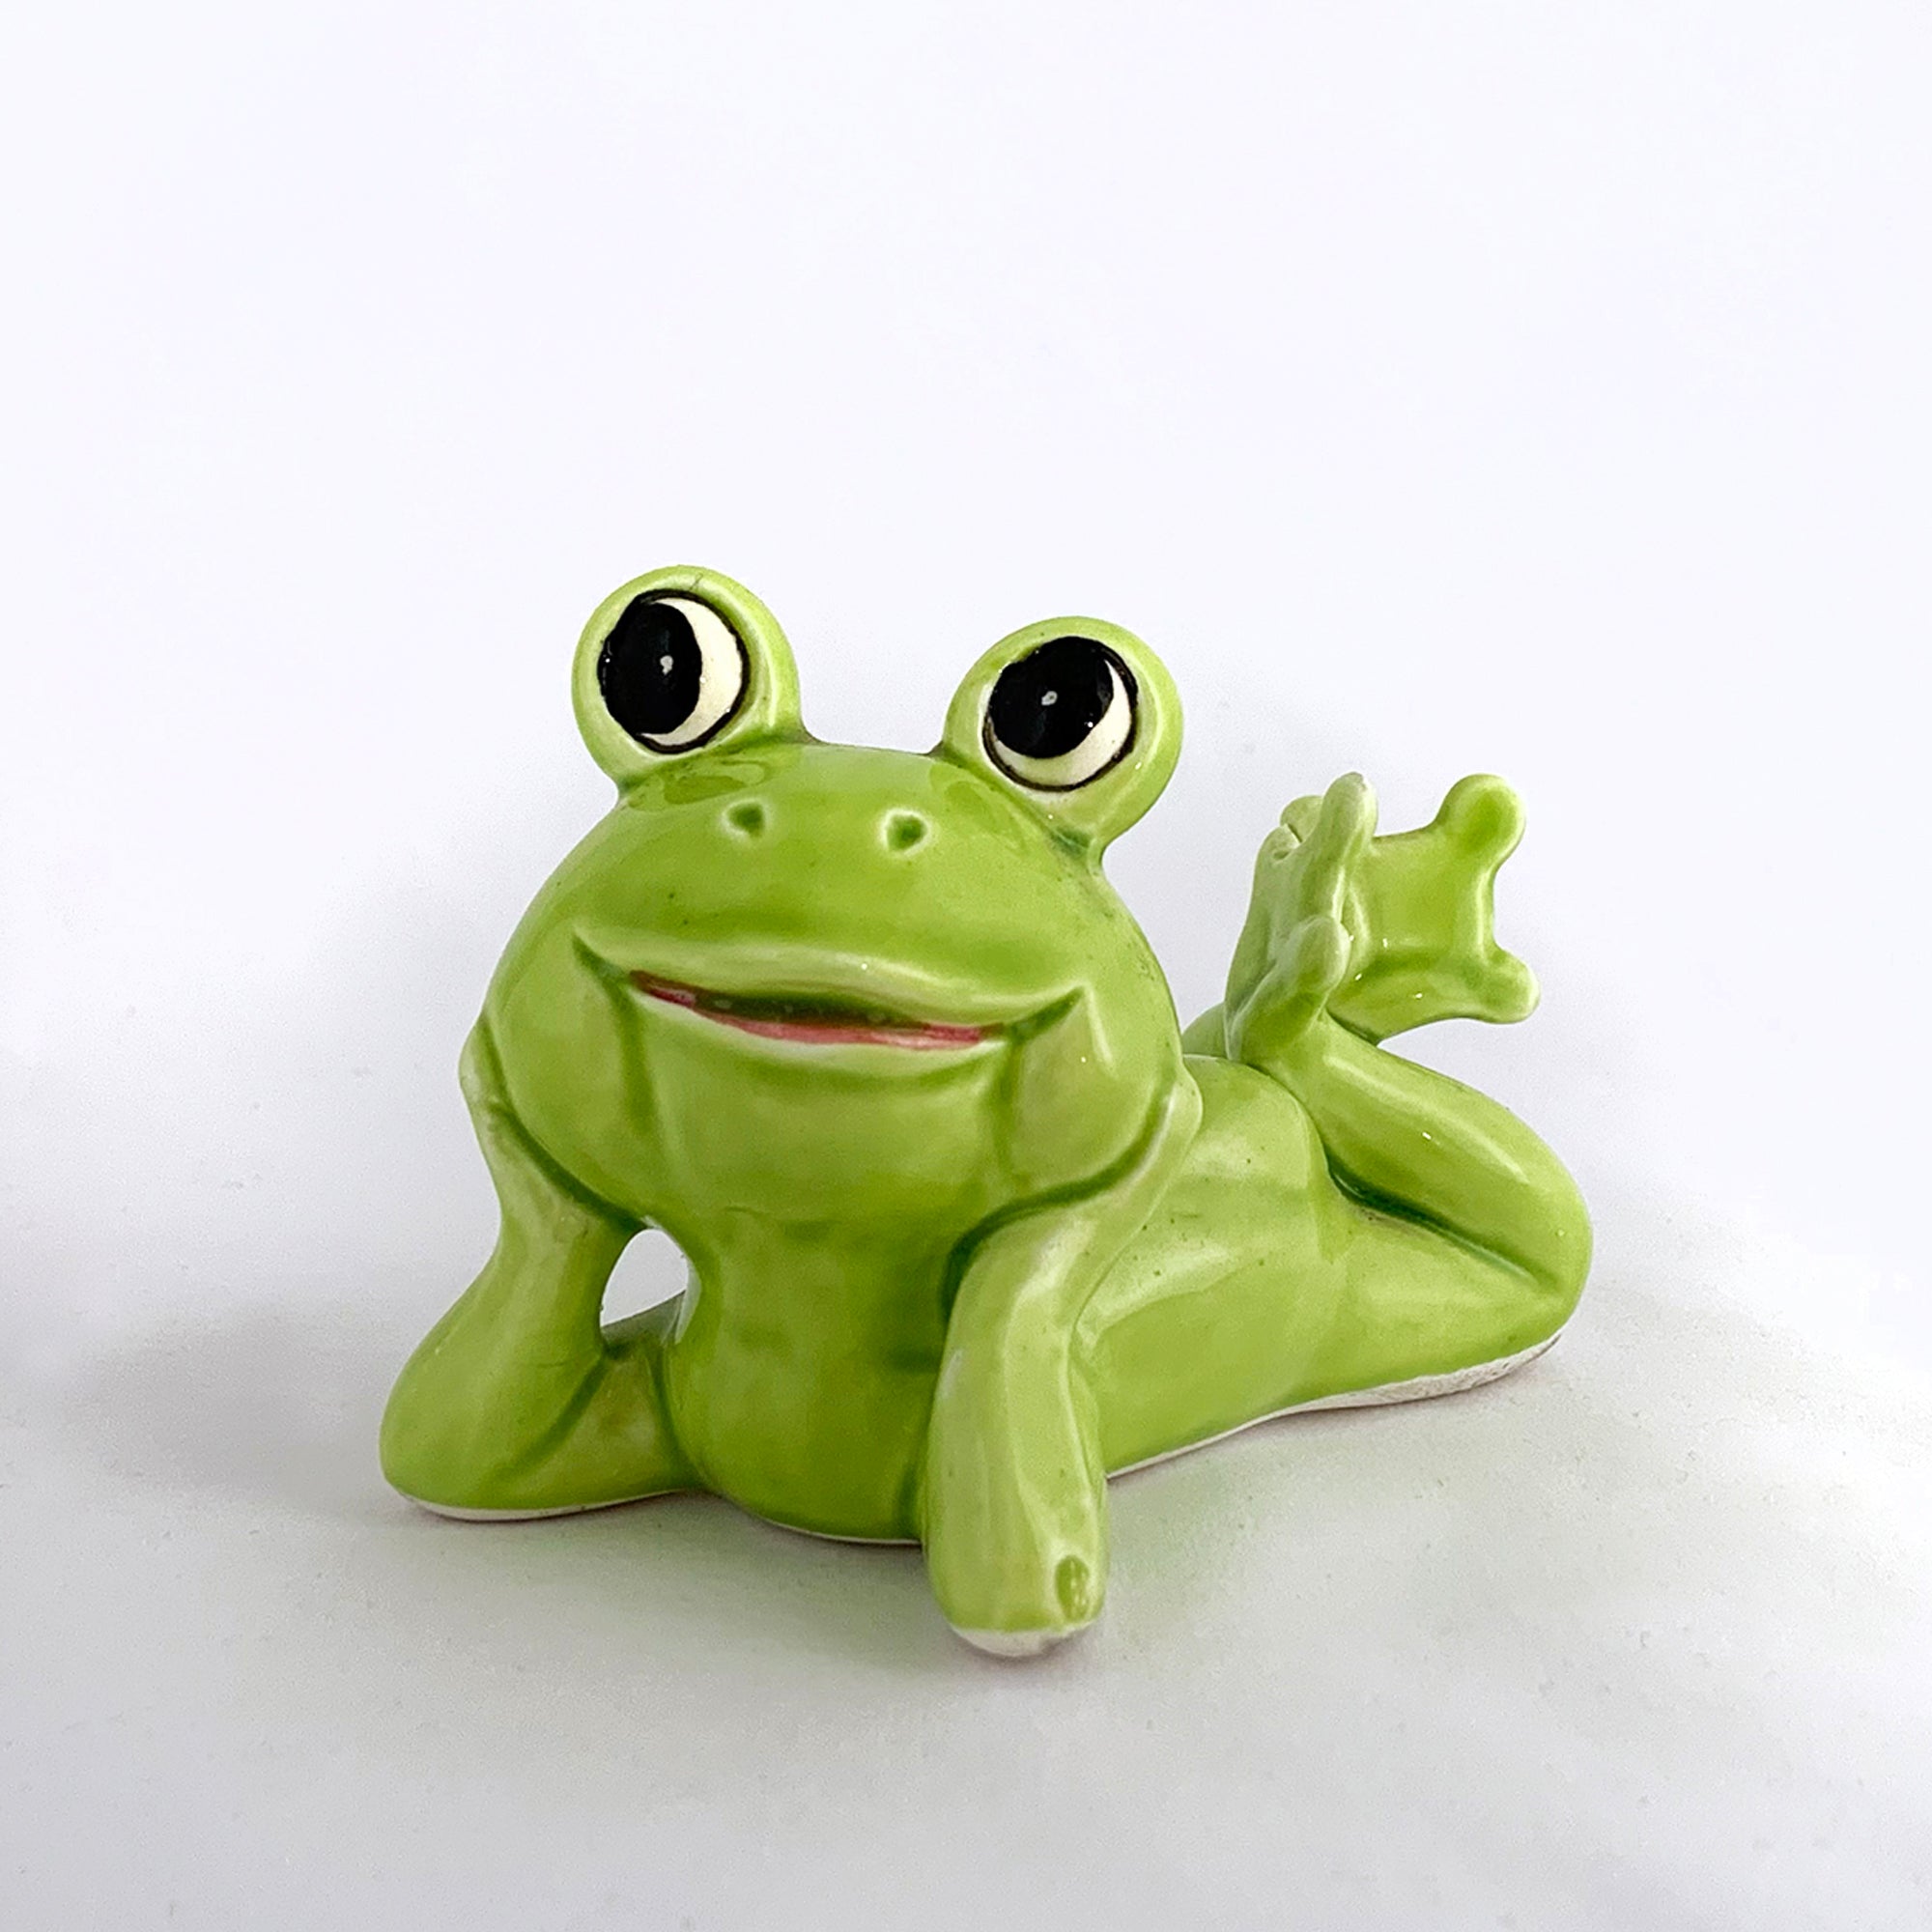 Vintage Mid-Century Ceramic Lime Green Smiling Resting Frog Figurine, –  Jack's Daughter of All Trades